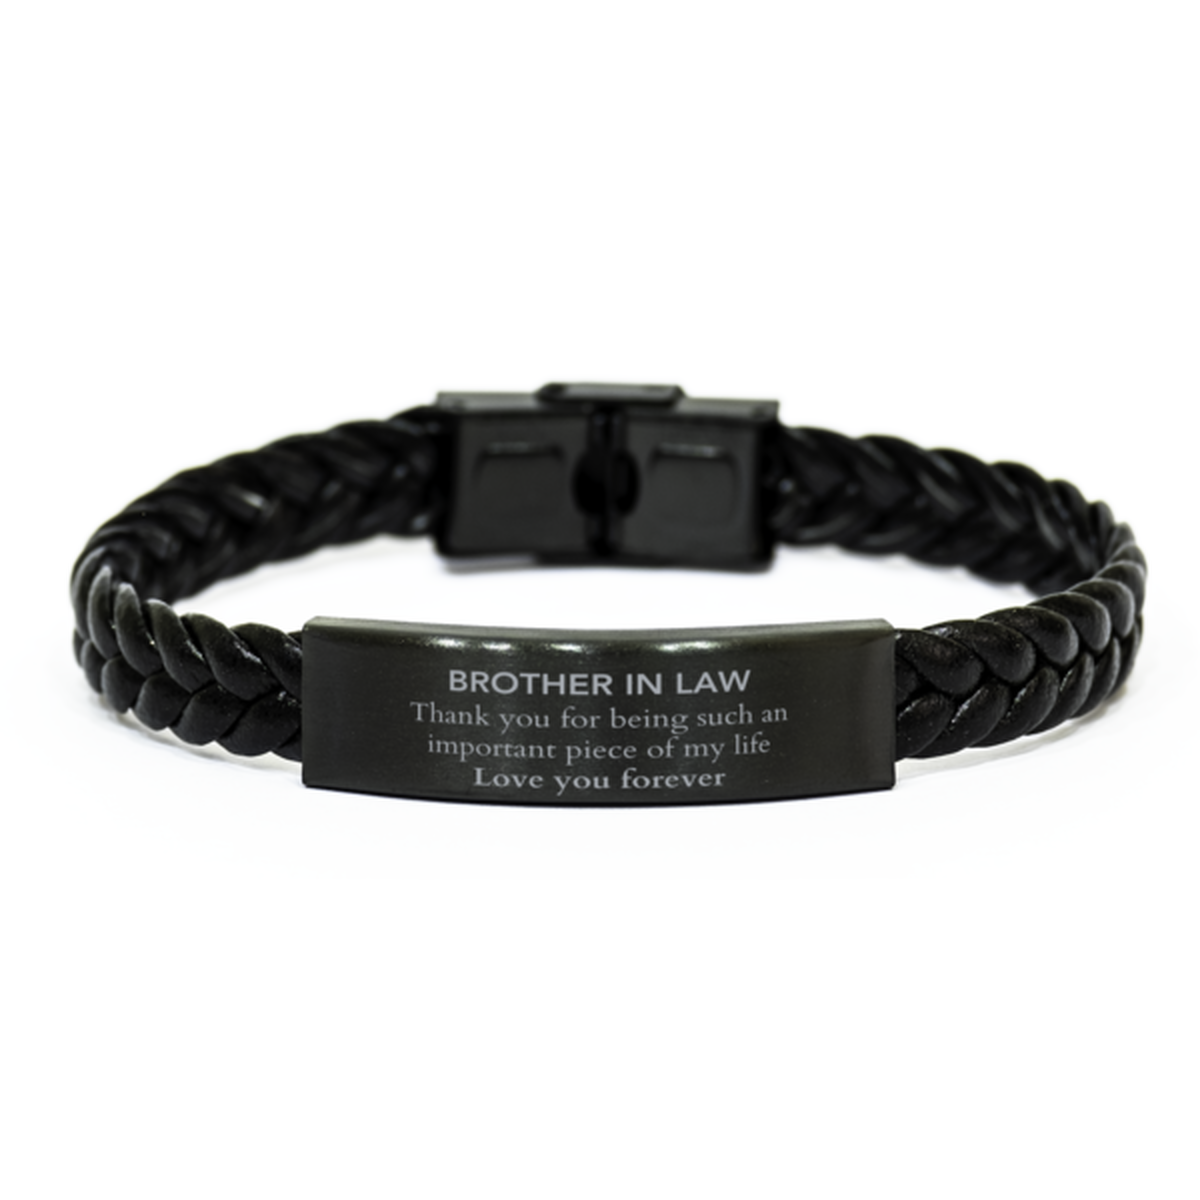 Appropriate Brother In Law Braided Leather Bracelet Epic Birthday Gifts for Brother In Law Thank you for being such an important piece of my life Brother In Law Christmas Mothers Fathers Day